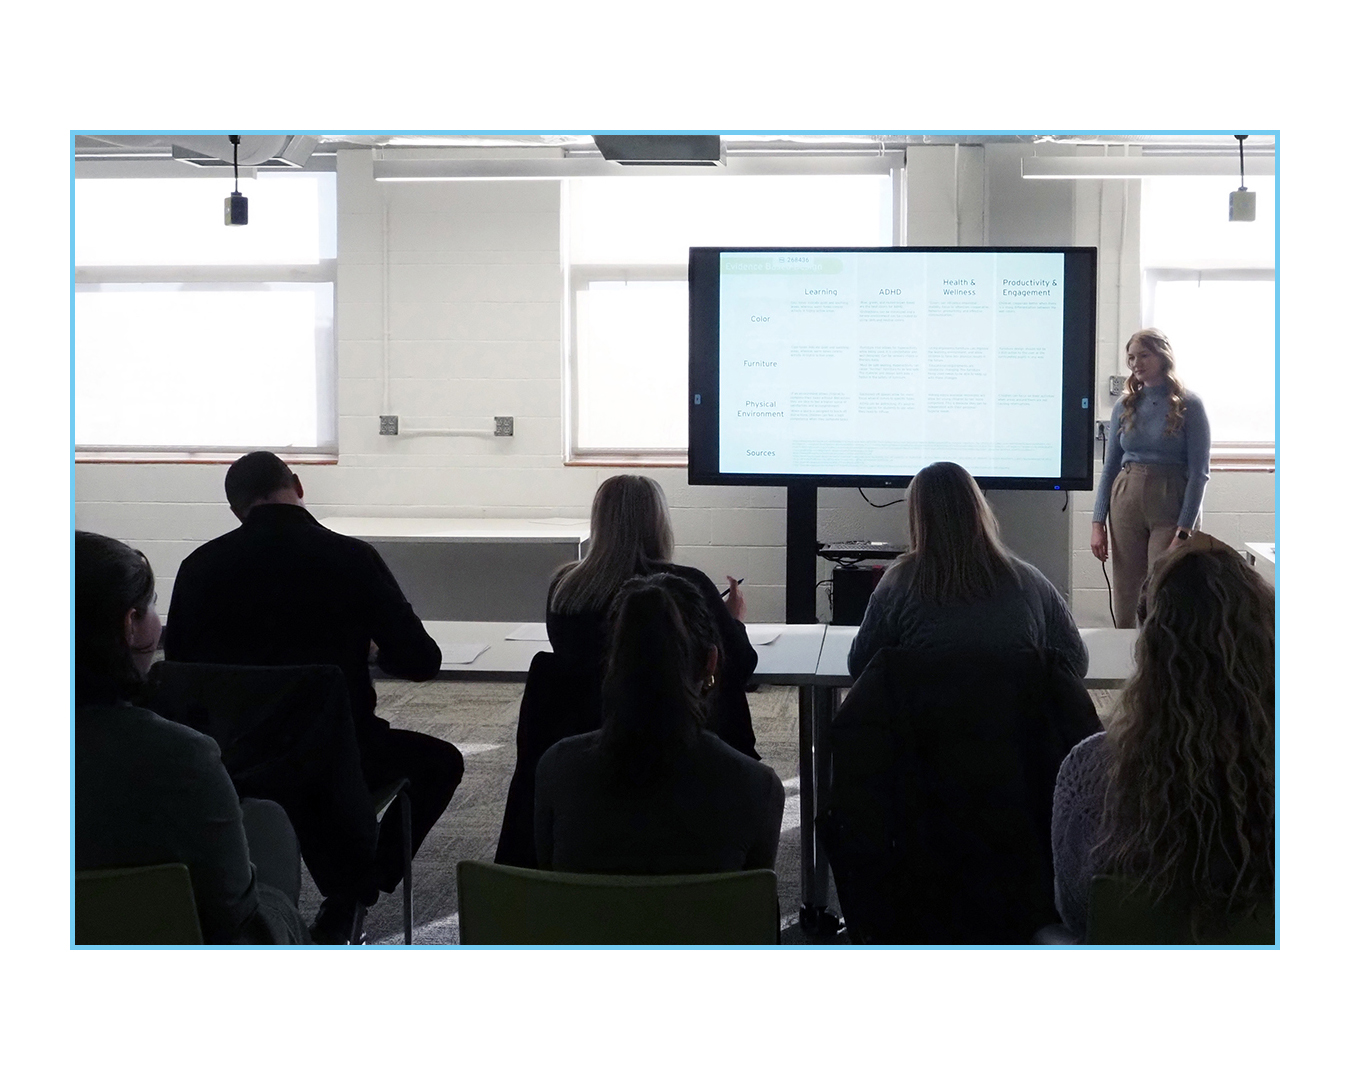 Student presents architectural plan on large digital display to seated audience in studio.